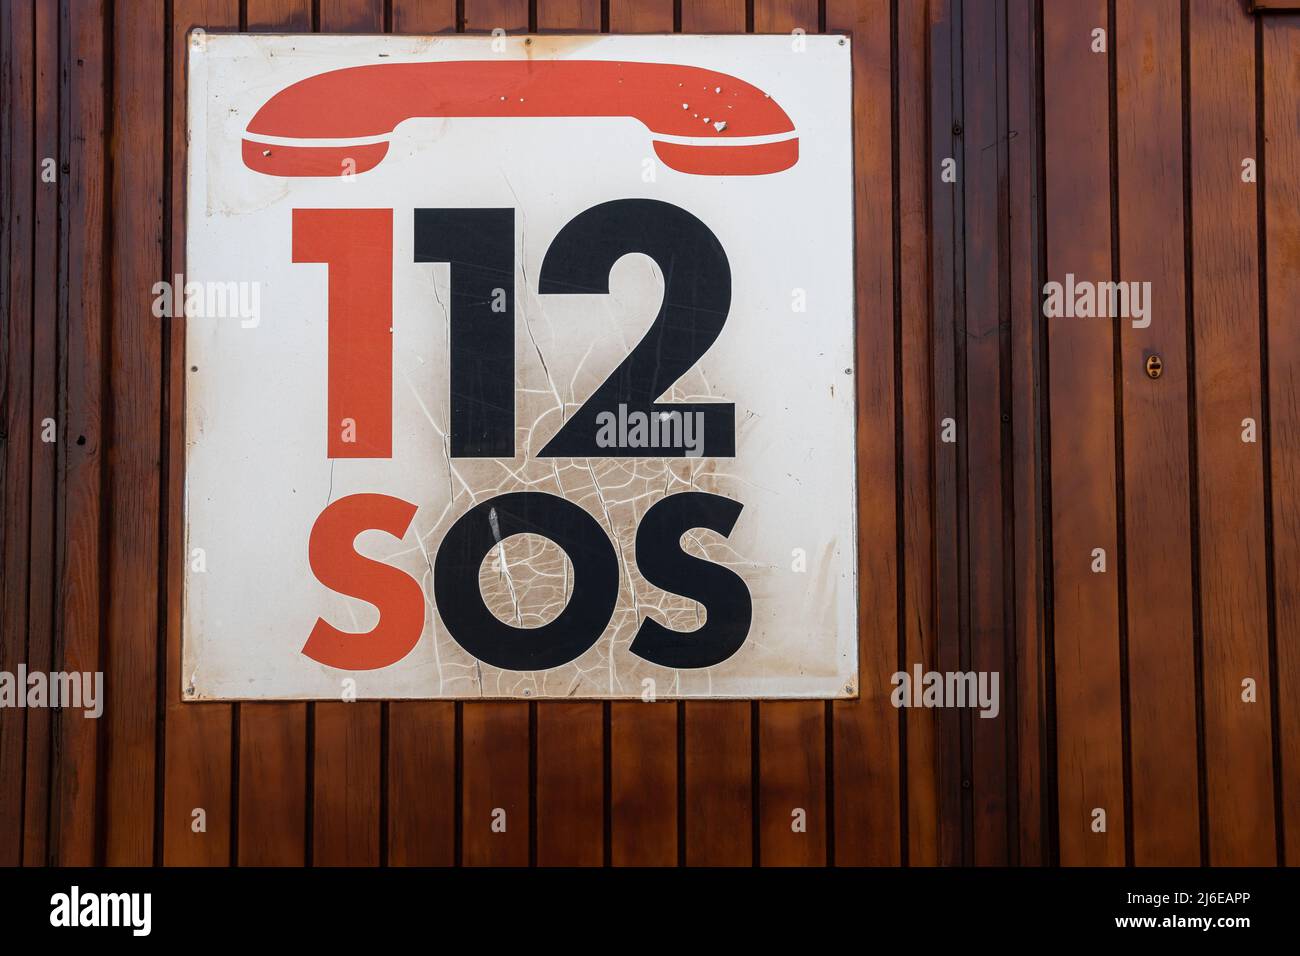 Close-up of an emergency sign with the telephone number 112 SOS, on a wooden background Stock Photo